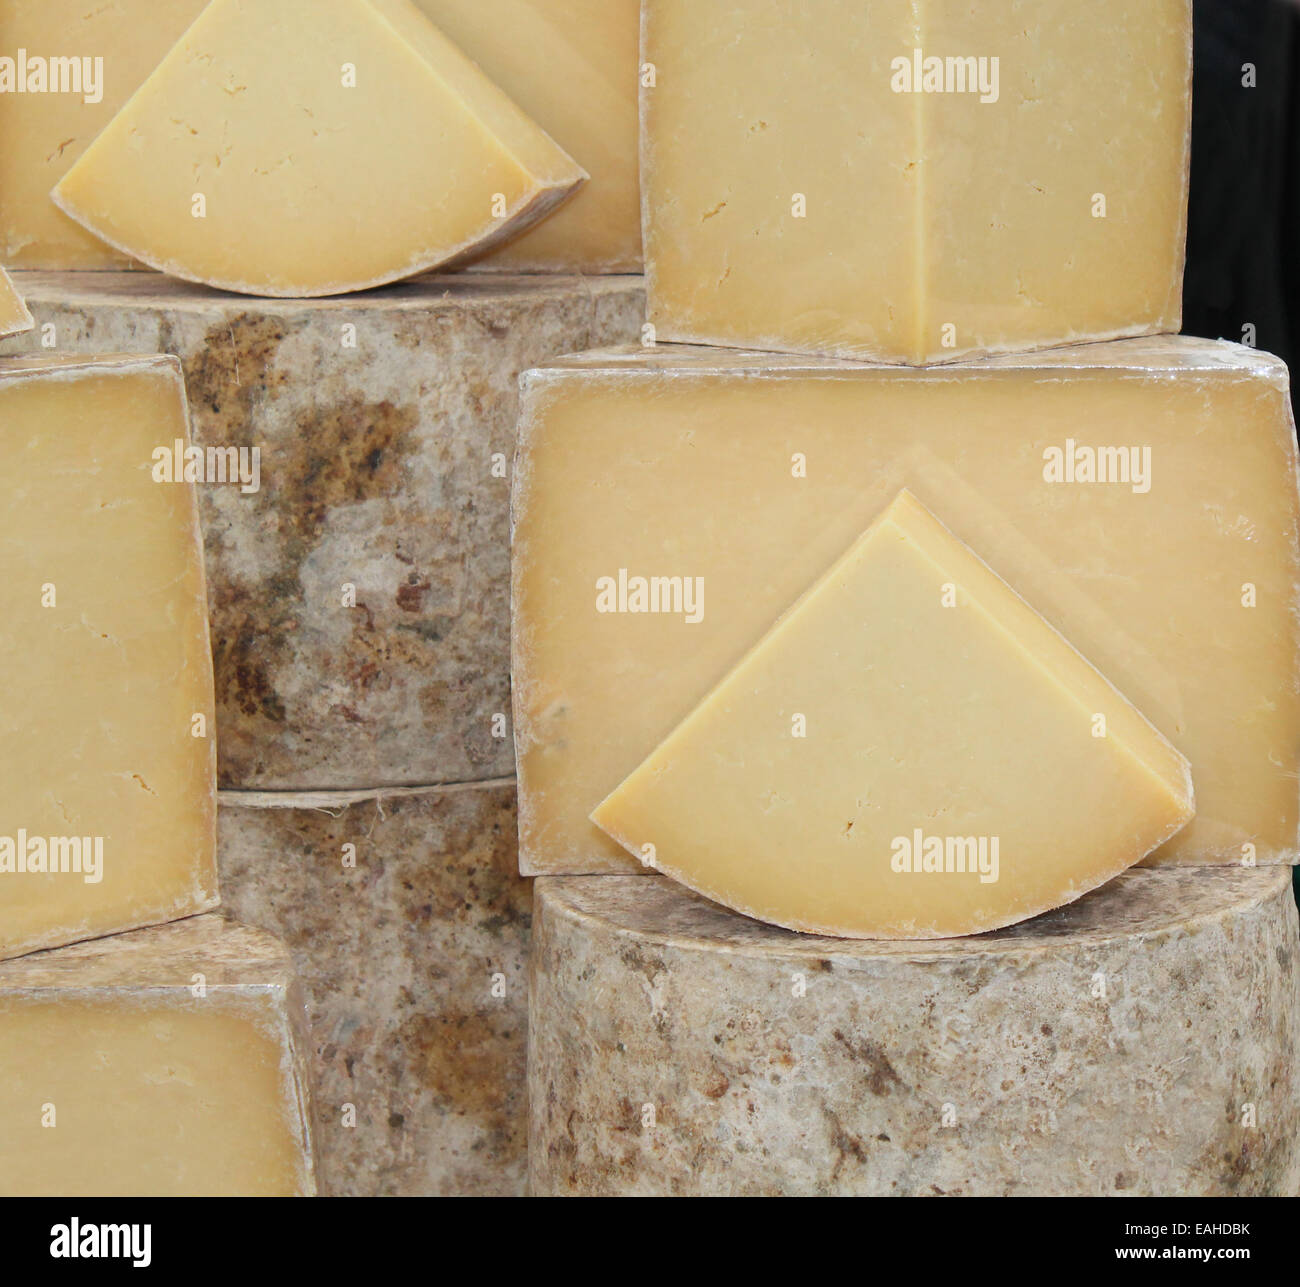 A Collection of Hard Round Cheeses on Display. Stock Photo